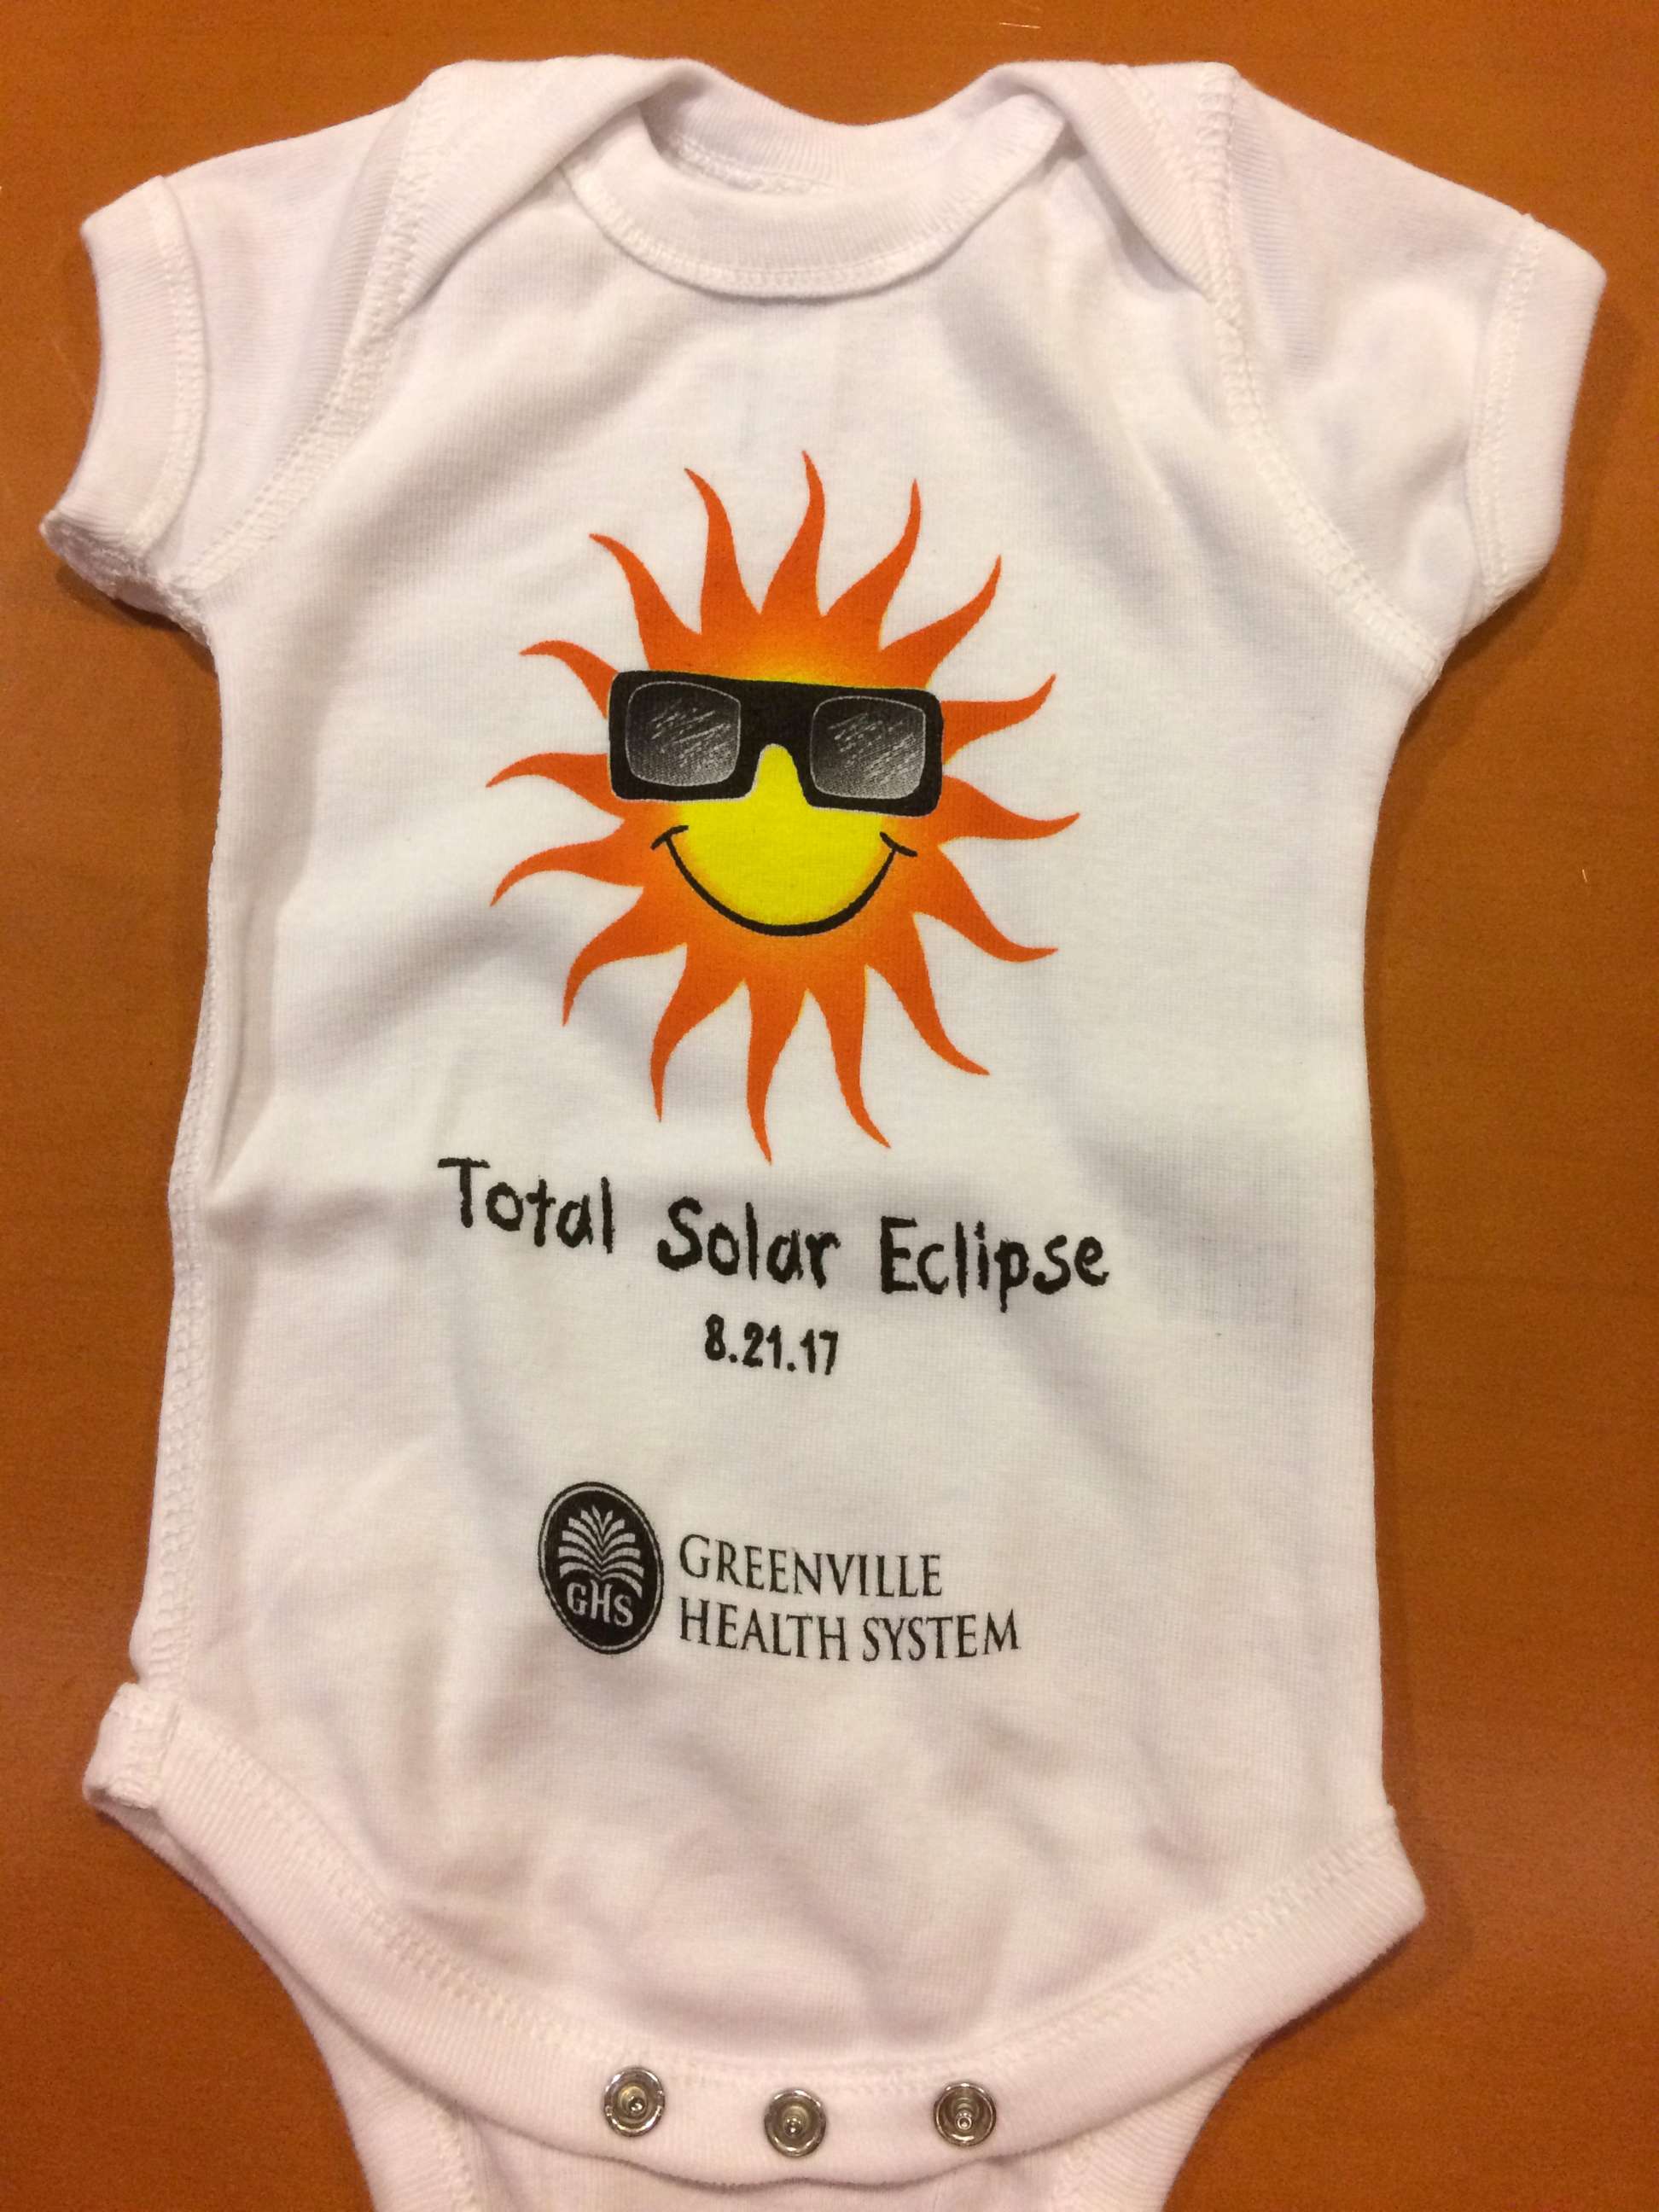 PHOTO: Greenville Memorial Hospital gifted 11 babies who were born on the day of the total solar eclipse a souvenir onesie.
